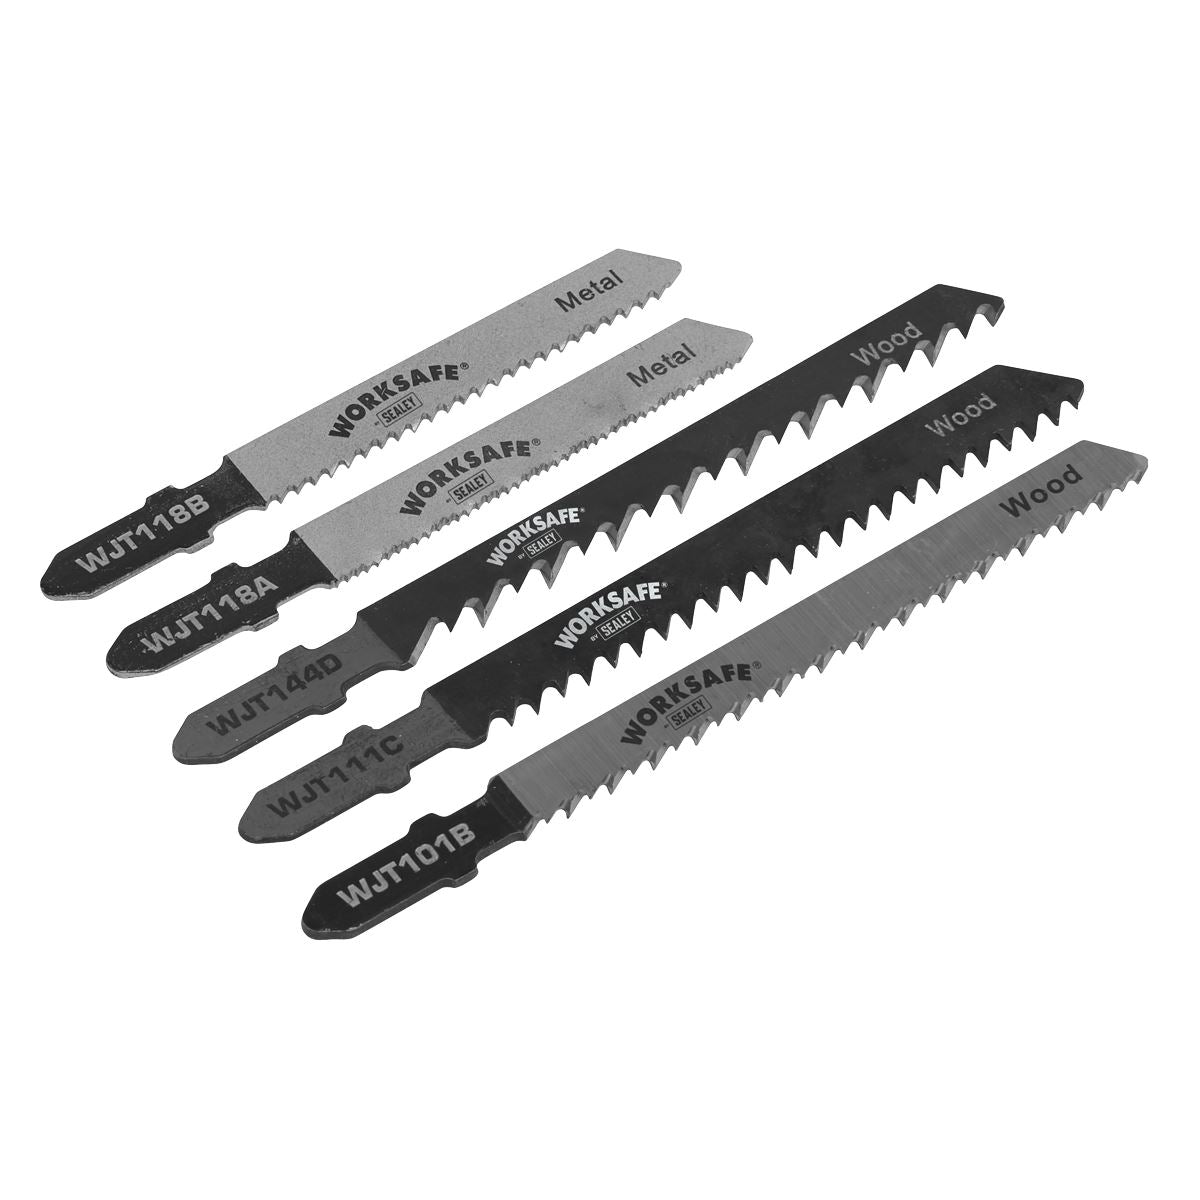 Sealey Assorted Jigsaw Blades - Pack of 5